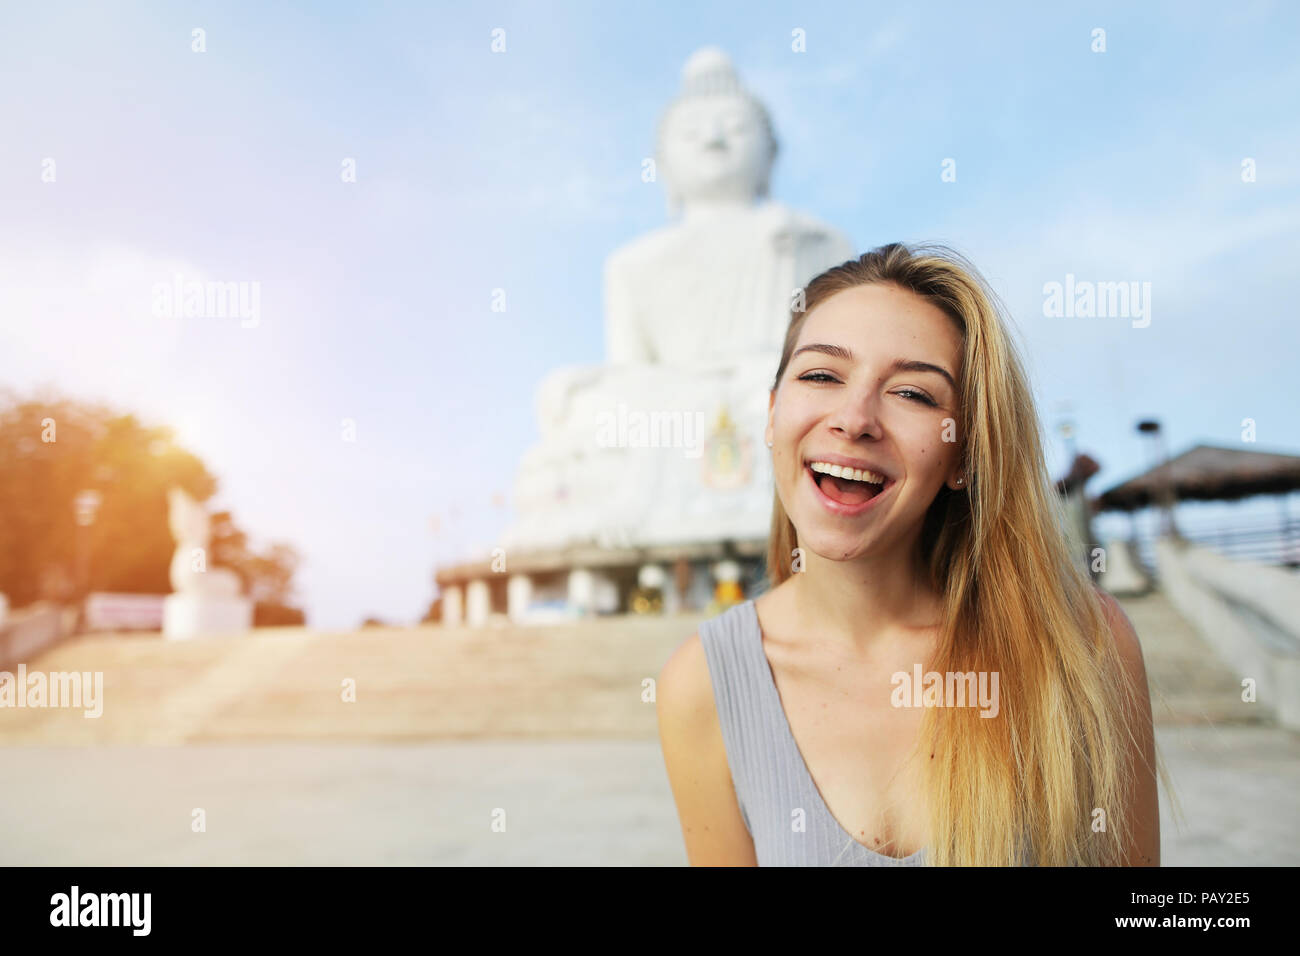 Young smiling girl near statue of Buddha in Phuket, Thailand. Stock Photo